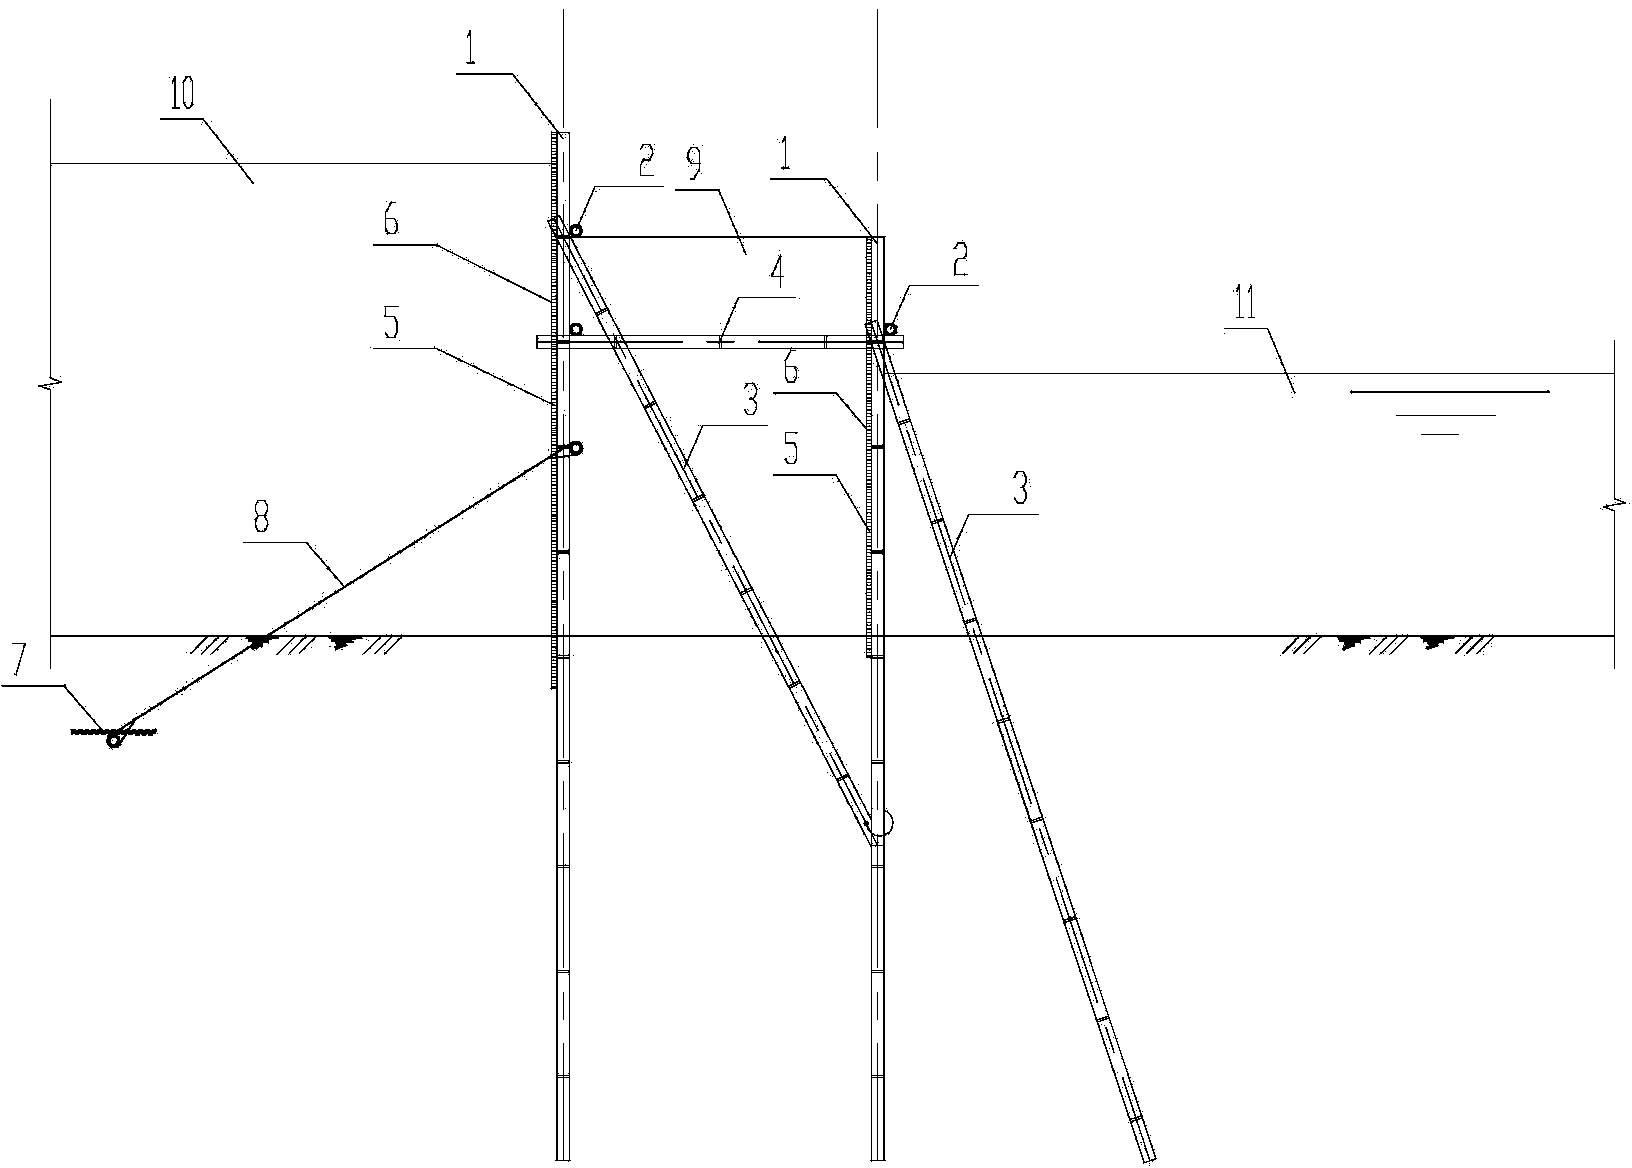 Vertical row-connected hydraulic reclamation dam structure for water areas